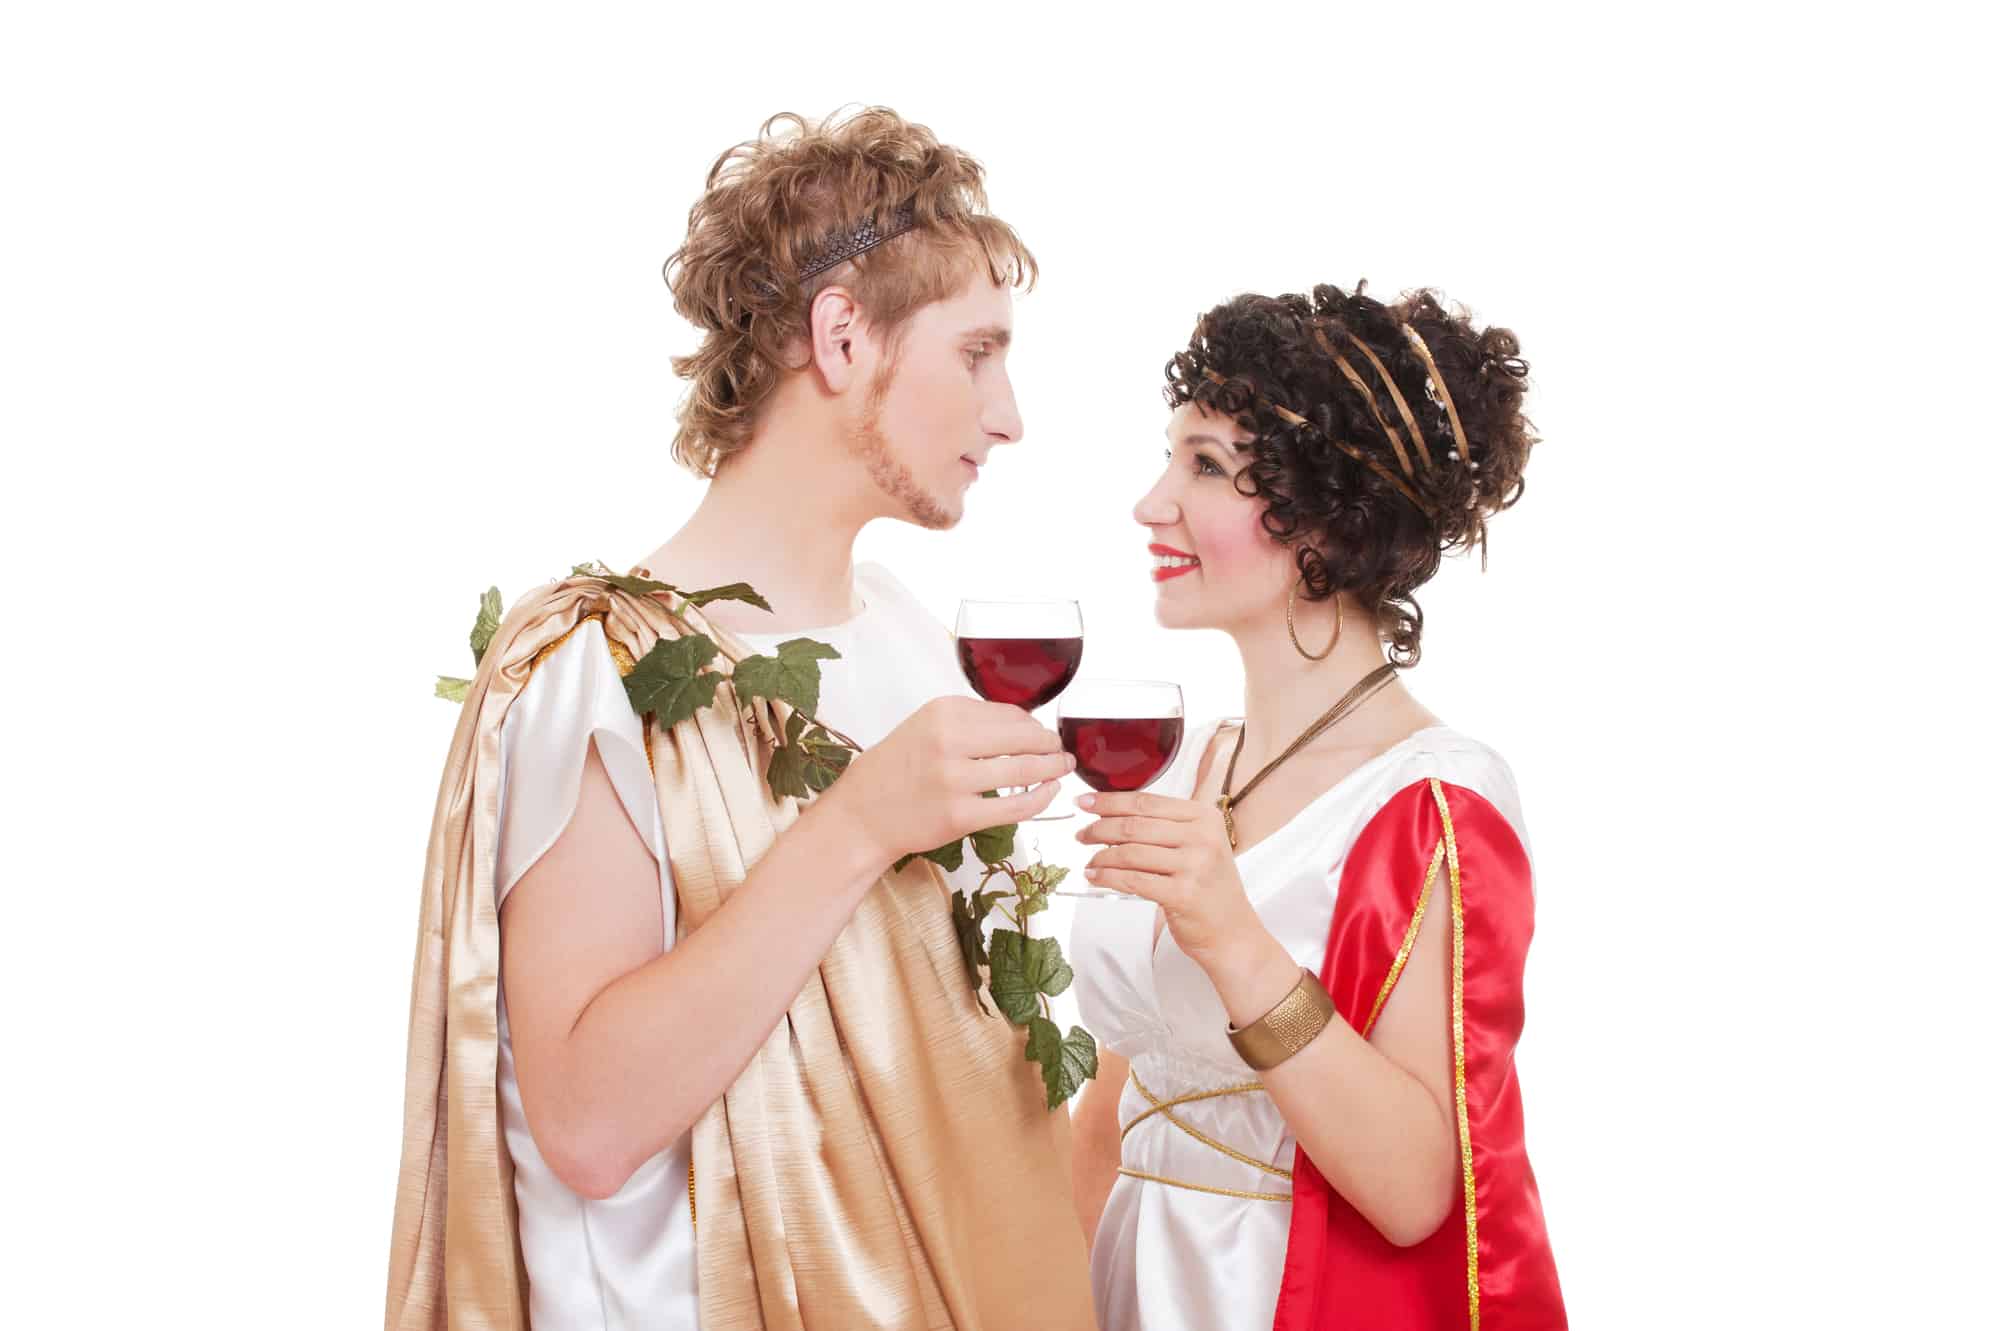 Man and woman in togas holding wine glasses and looking at each other.